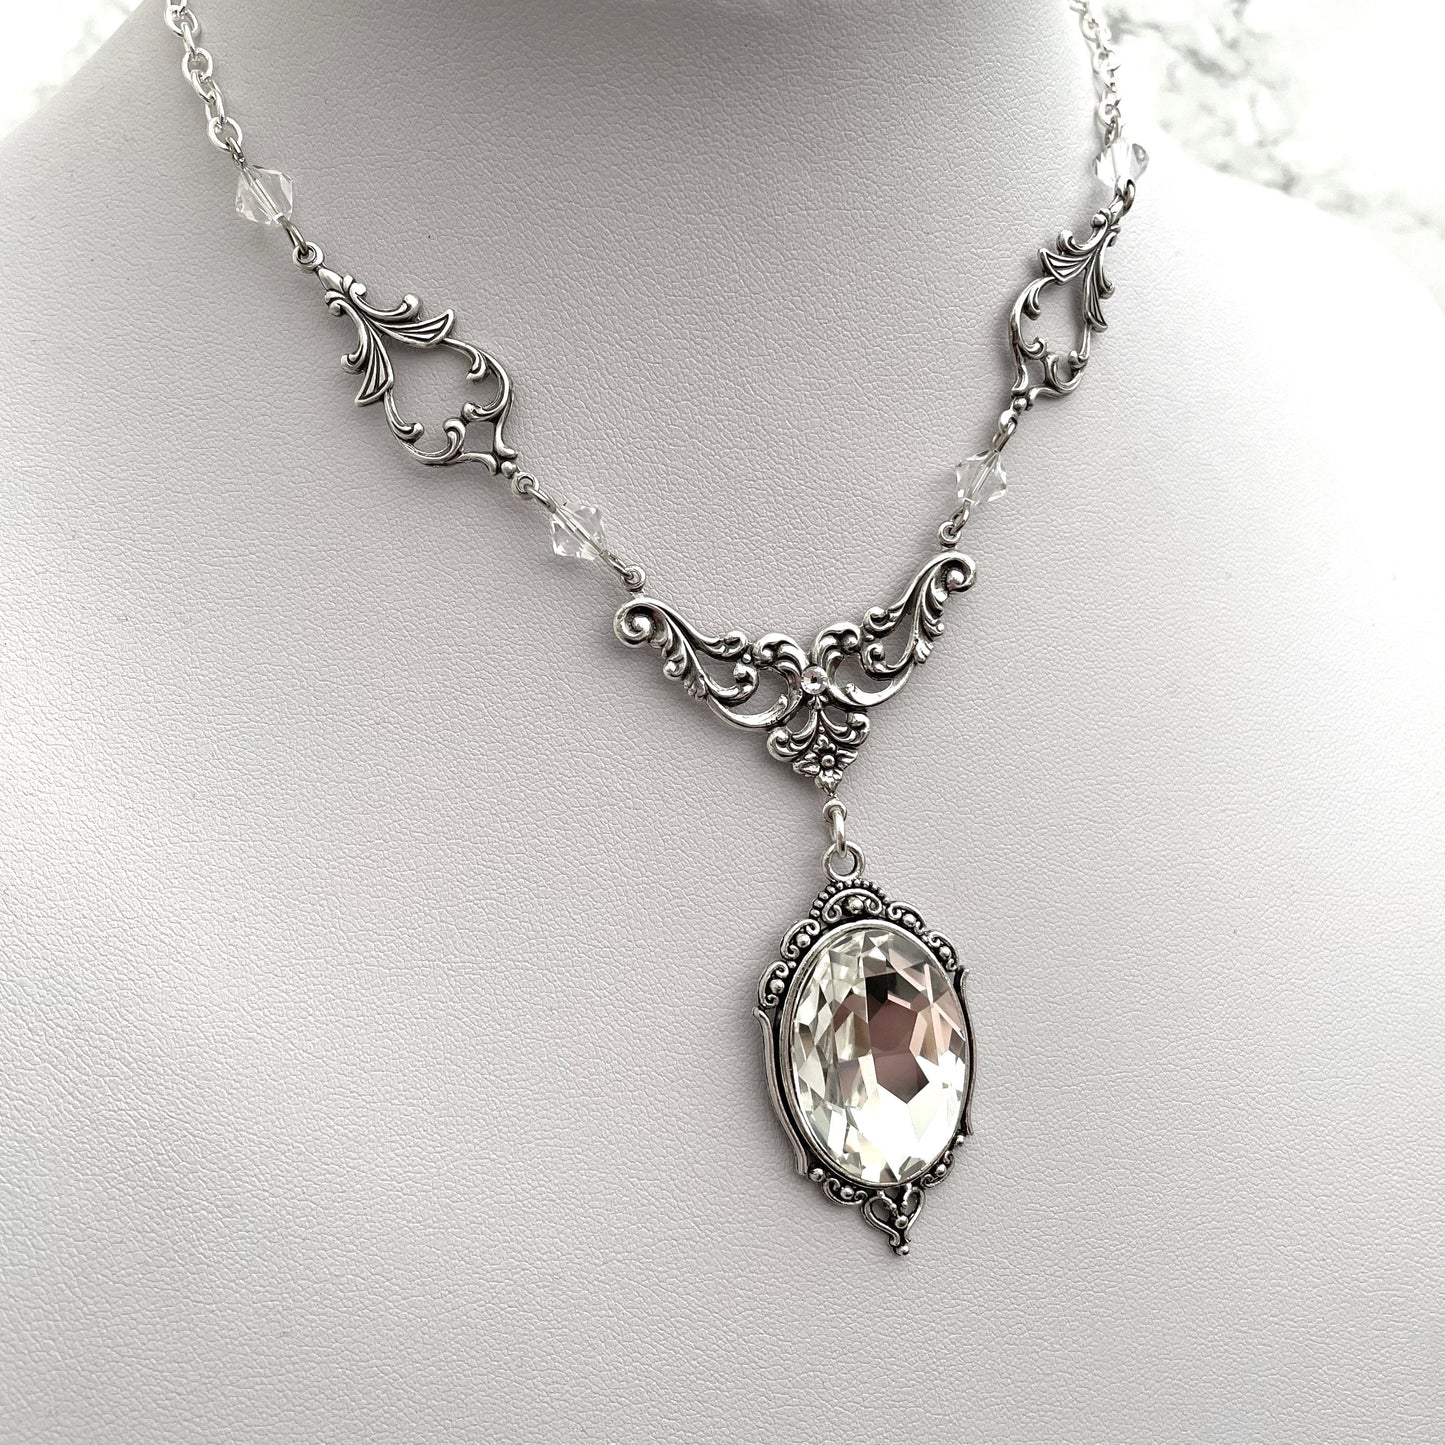 'Lenore' Necklace (Moonlight - Clear)